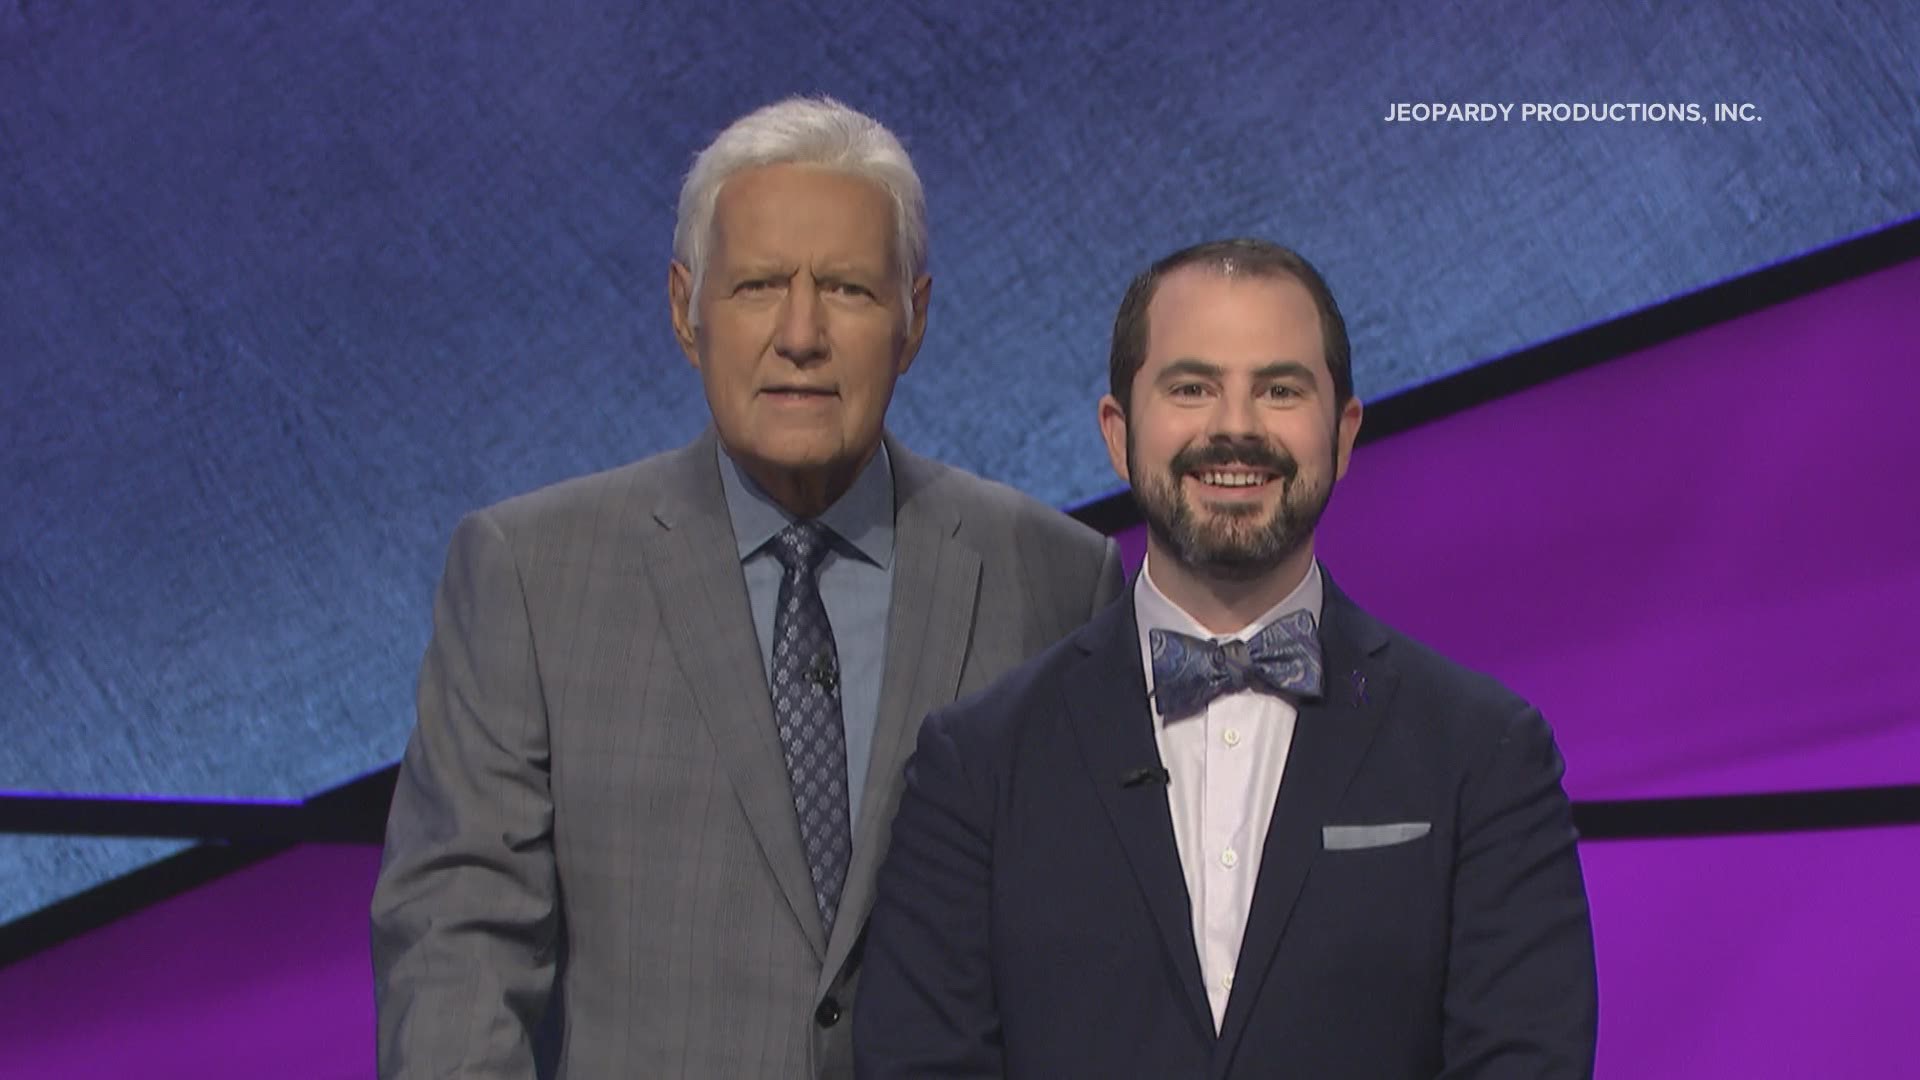 Nathan Berger of Portland competed in Wednesday night's episode of Jeopardy! and won.